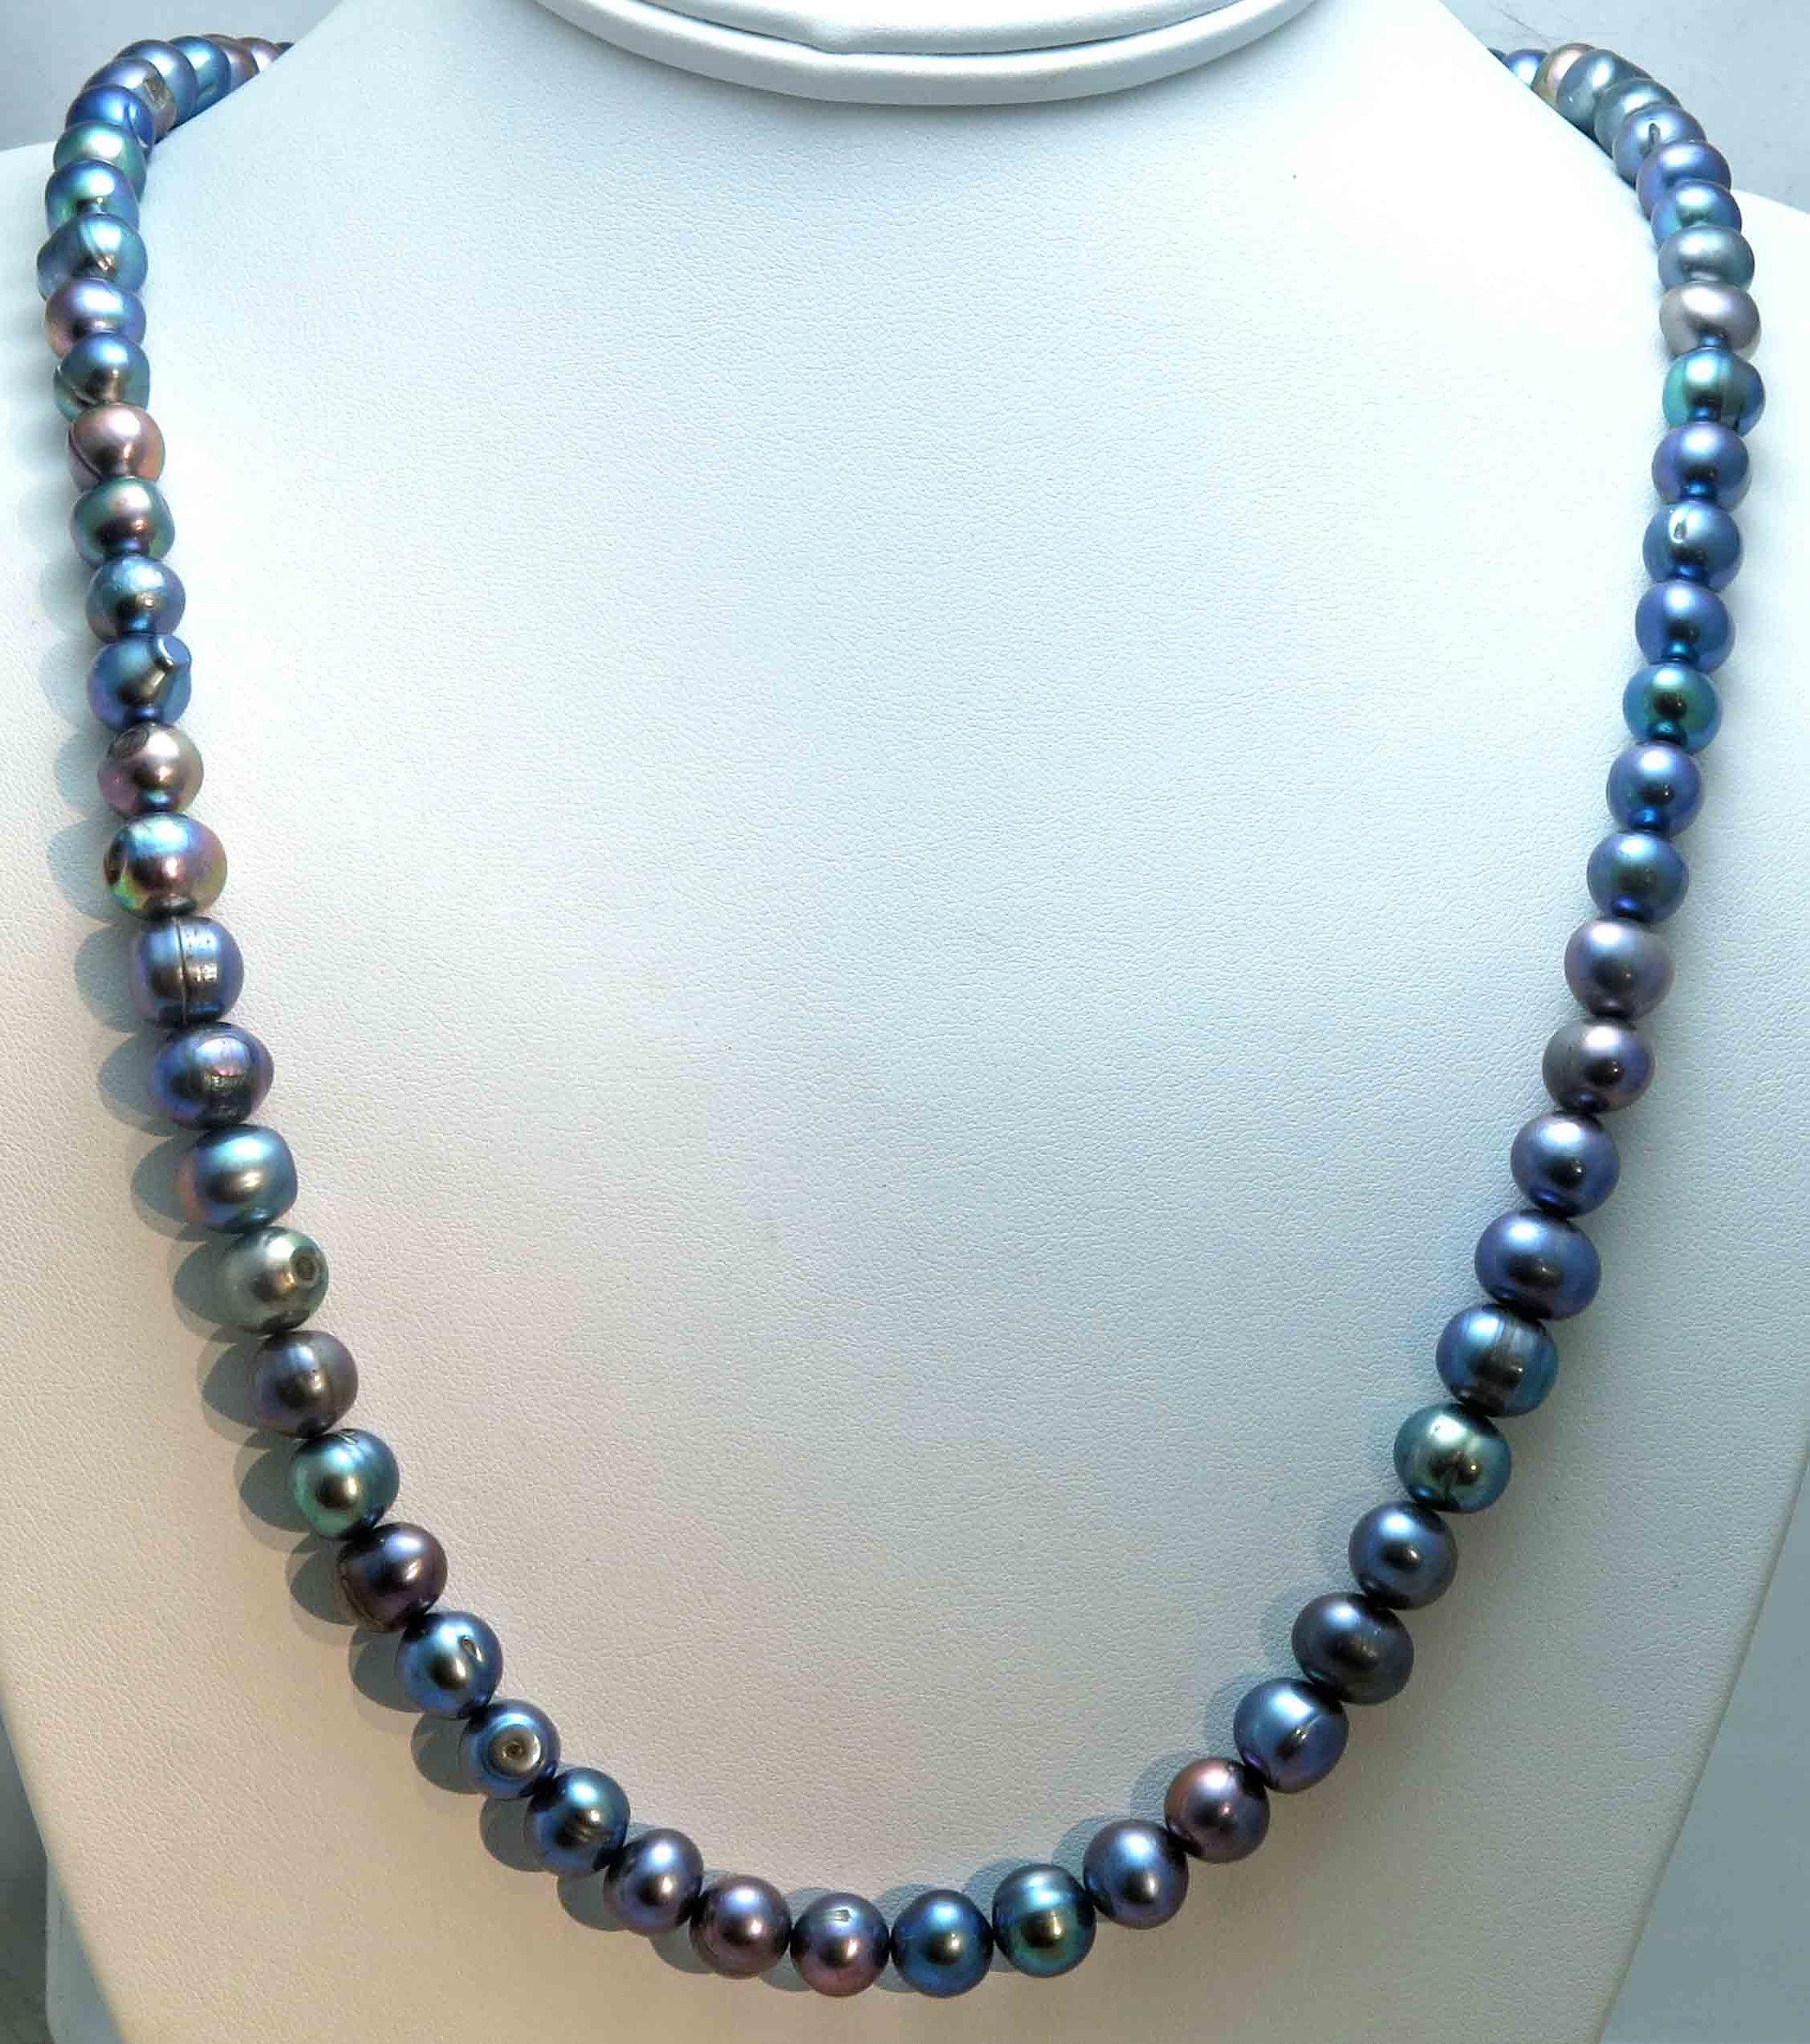 Necklace Of Peacock Black Pearls - Lot 1146948 | ALLBIDS